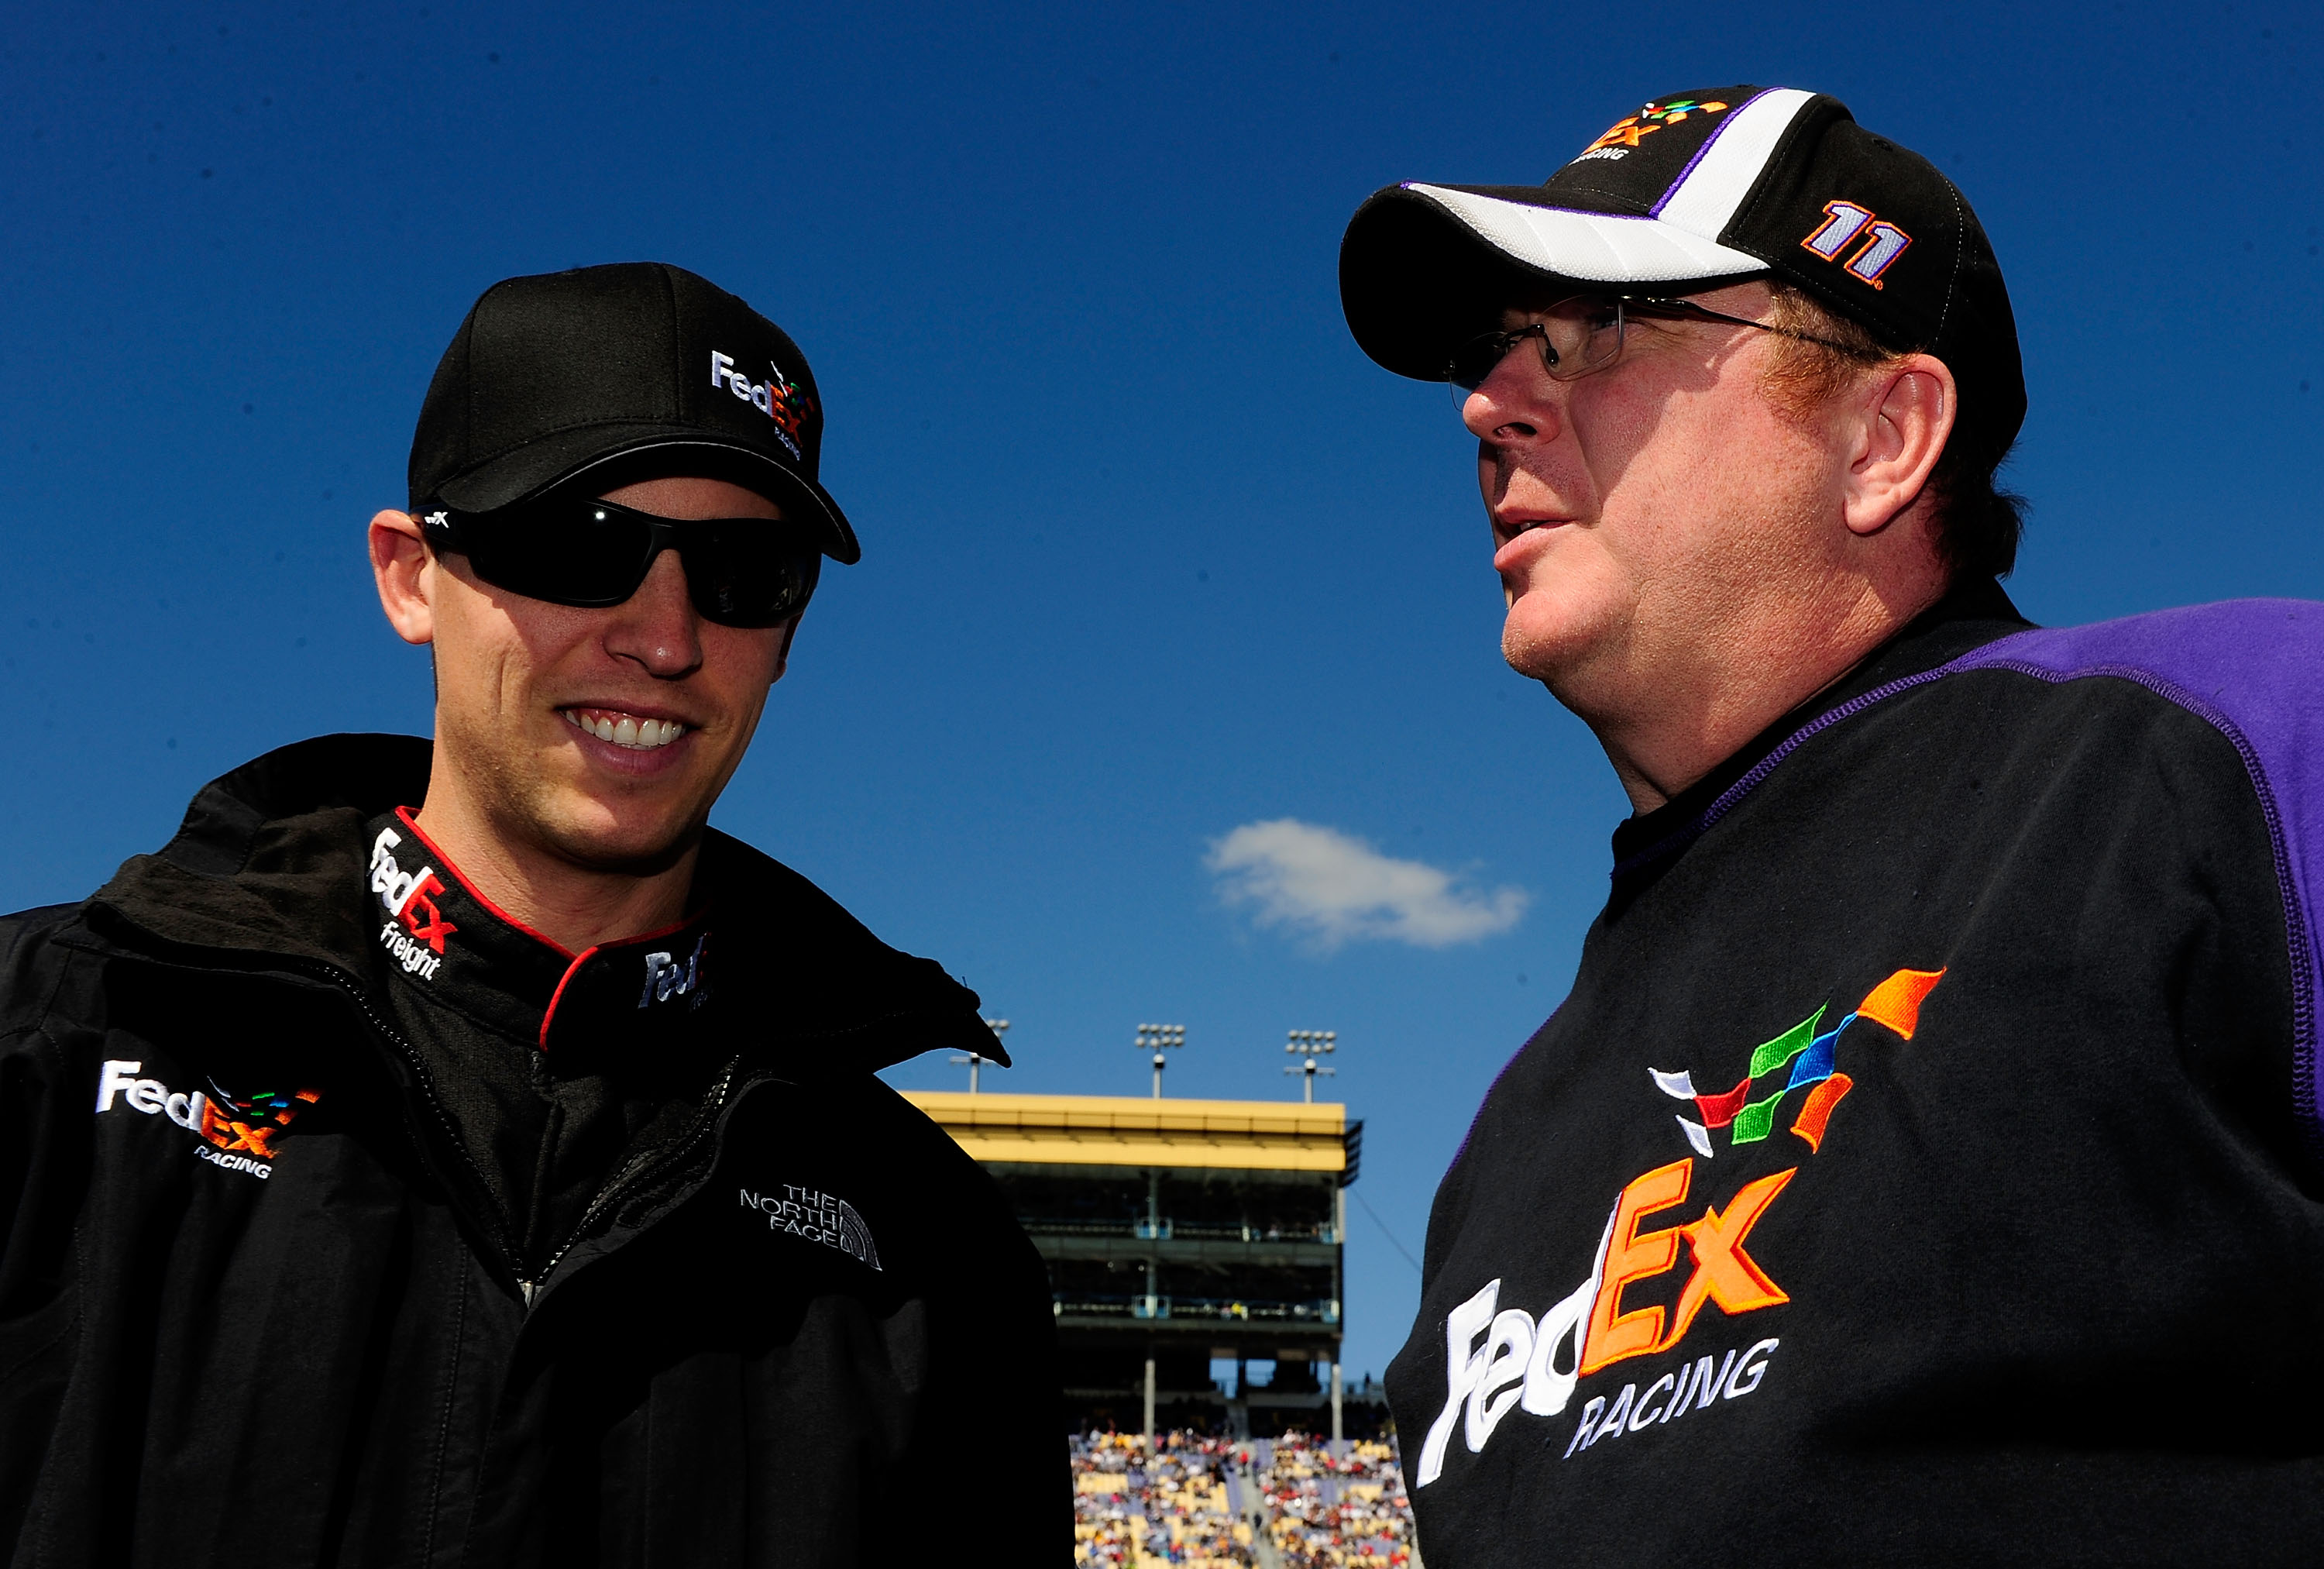 KANSAS CITY, KS - OCTOBER 03:  Denny Hamlin, driver of the #11 FedEx Toyota, stands with crew chief Mike Ford during prerace for the NASCAR Sprint Cup Series Price Chopper 400 on October 3, 2010 in Kansas City, Kansas.  (Photo by Rusty Jarrett/Getty Image